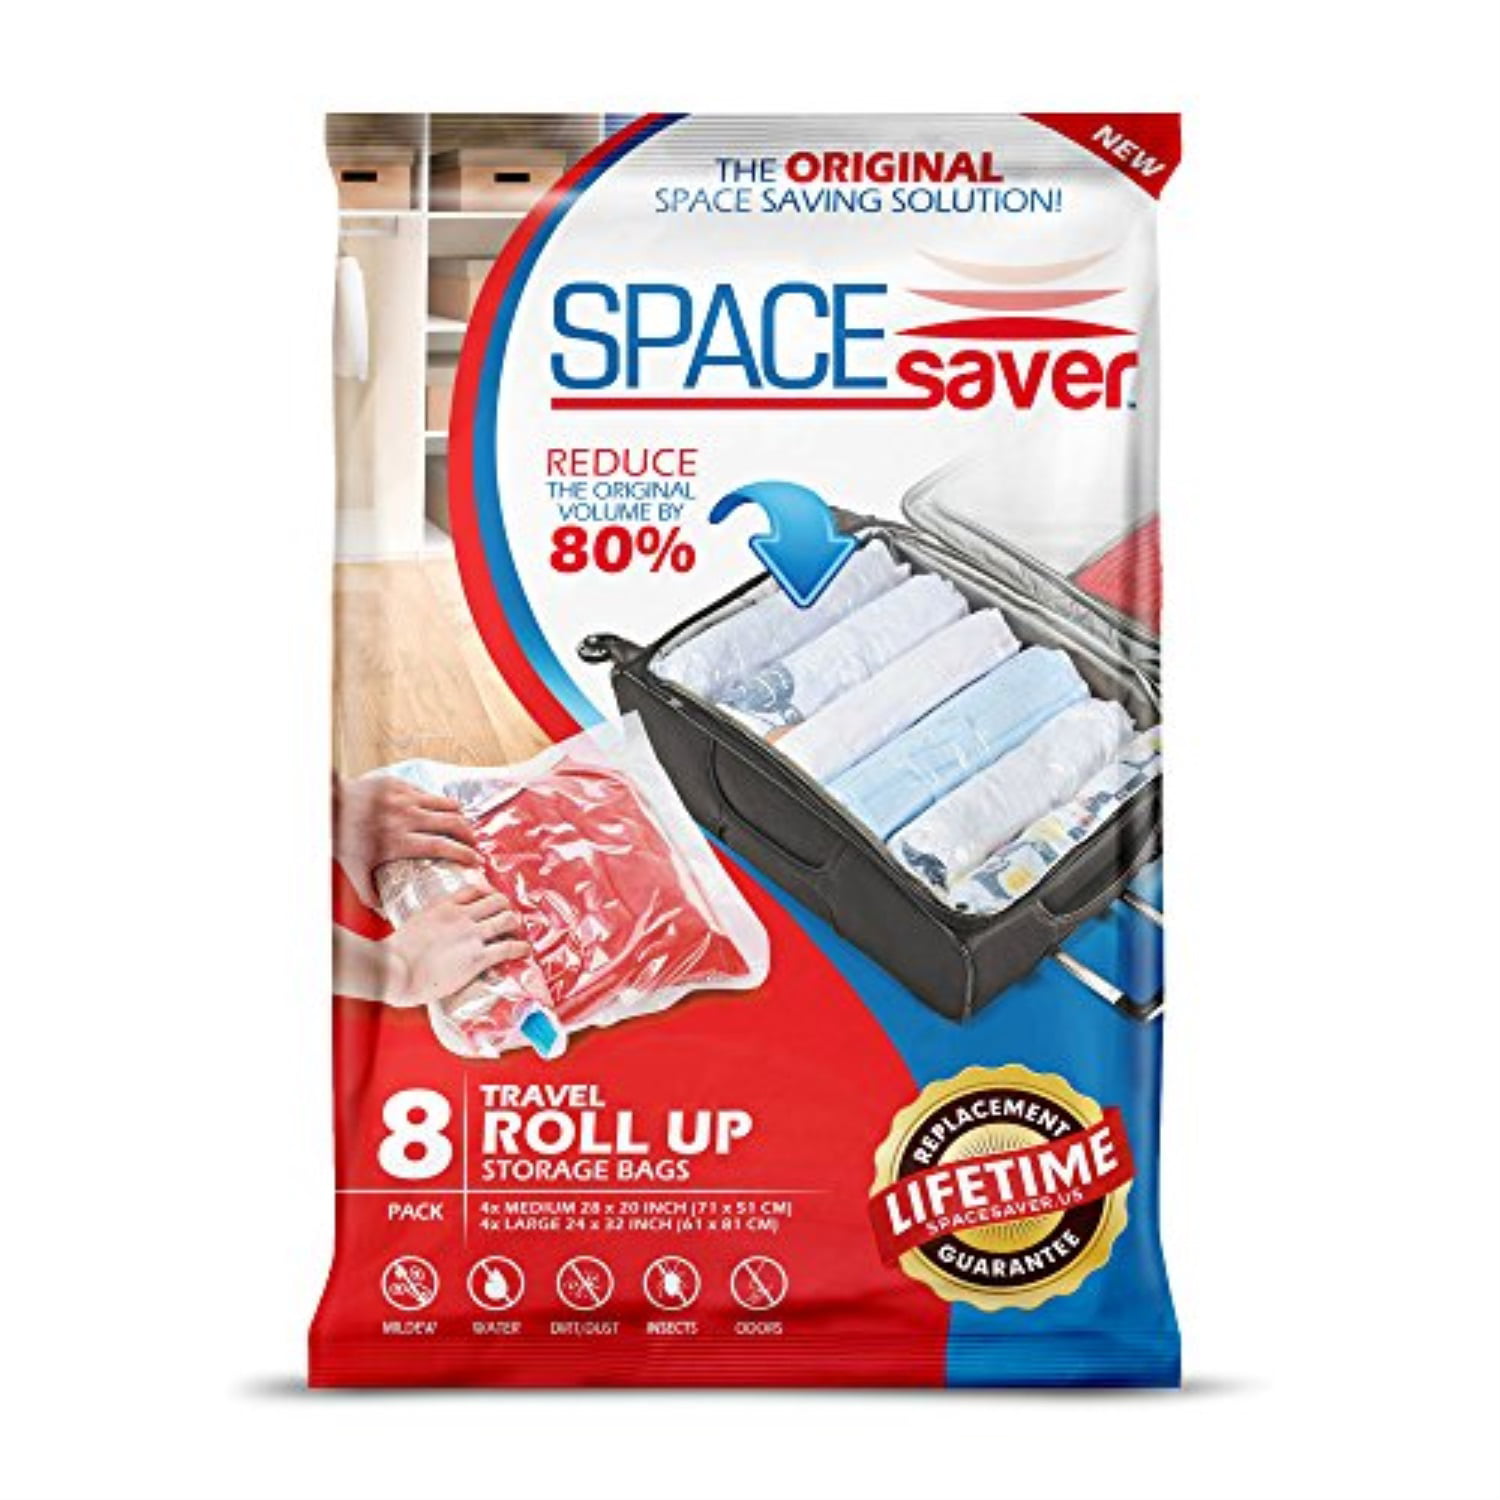 Travel Compression Space Saver Storage Bags Hand Rolling Roll Up No Vacuum 5pcs 